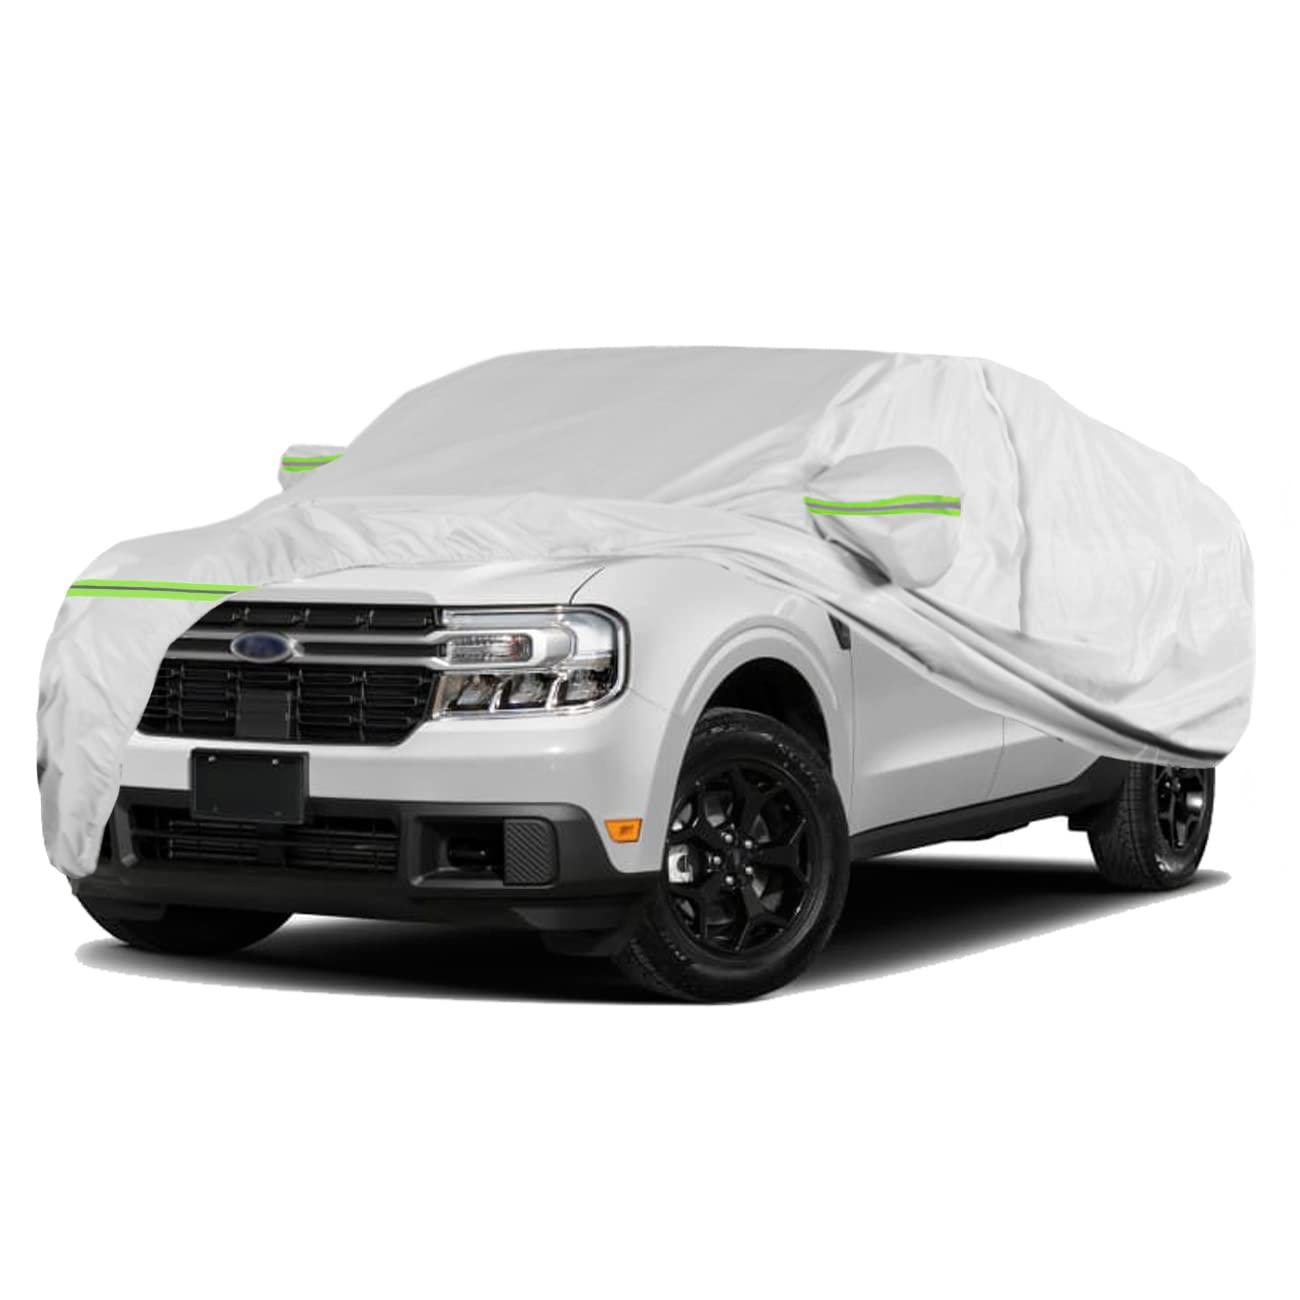 Ready stock】Universal Half Car Cover Outdoor Sun UV Dust Resistant  Protection Cover for Sedan SUV